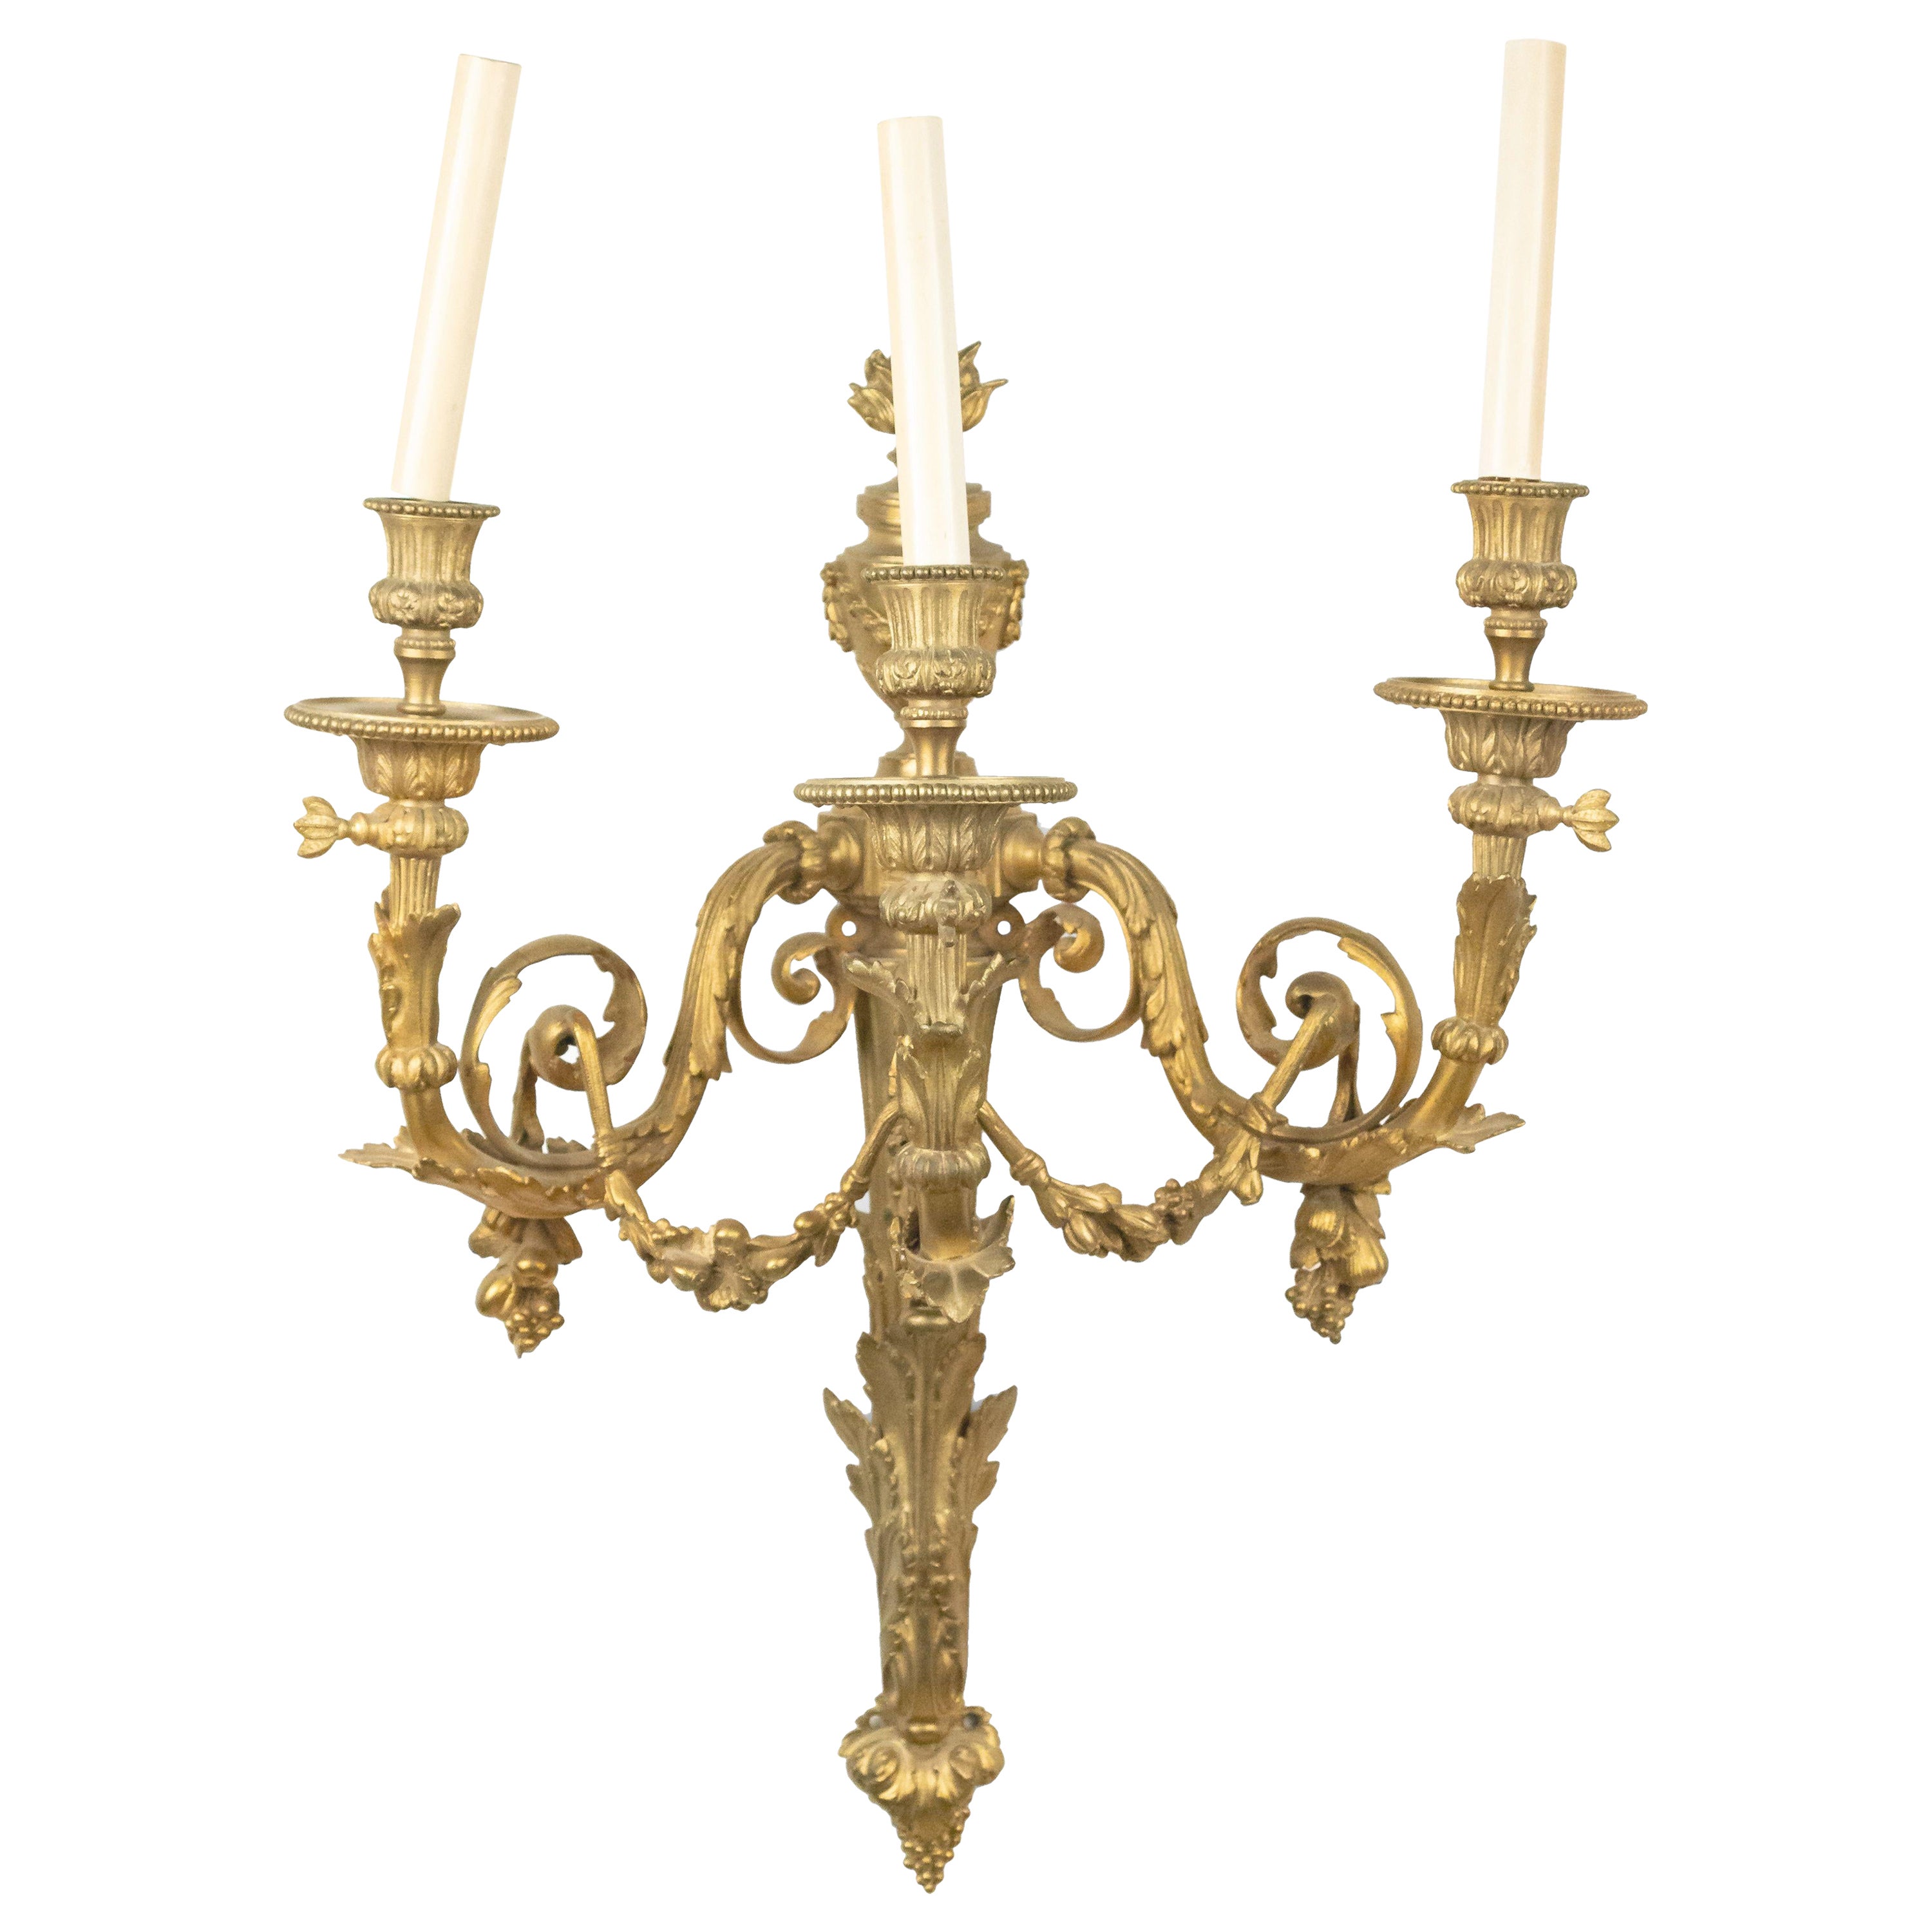 French Louis XV Style Gilt Bronze Wall Sconces